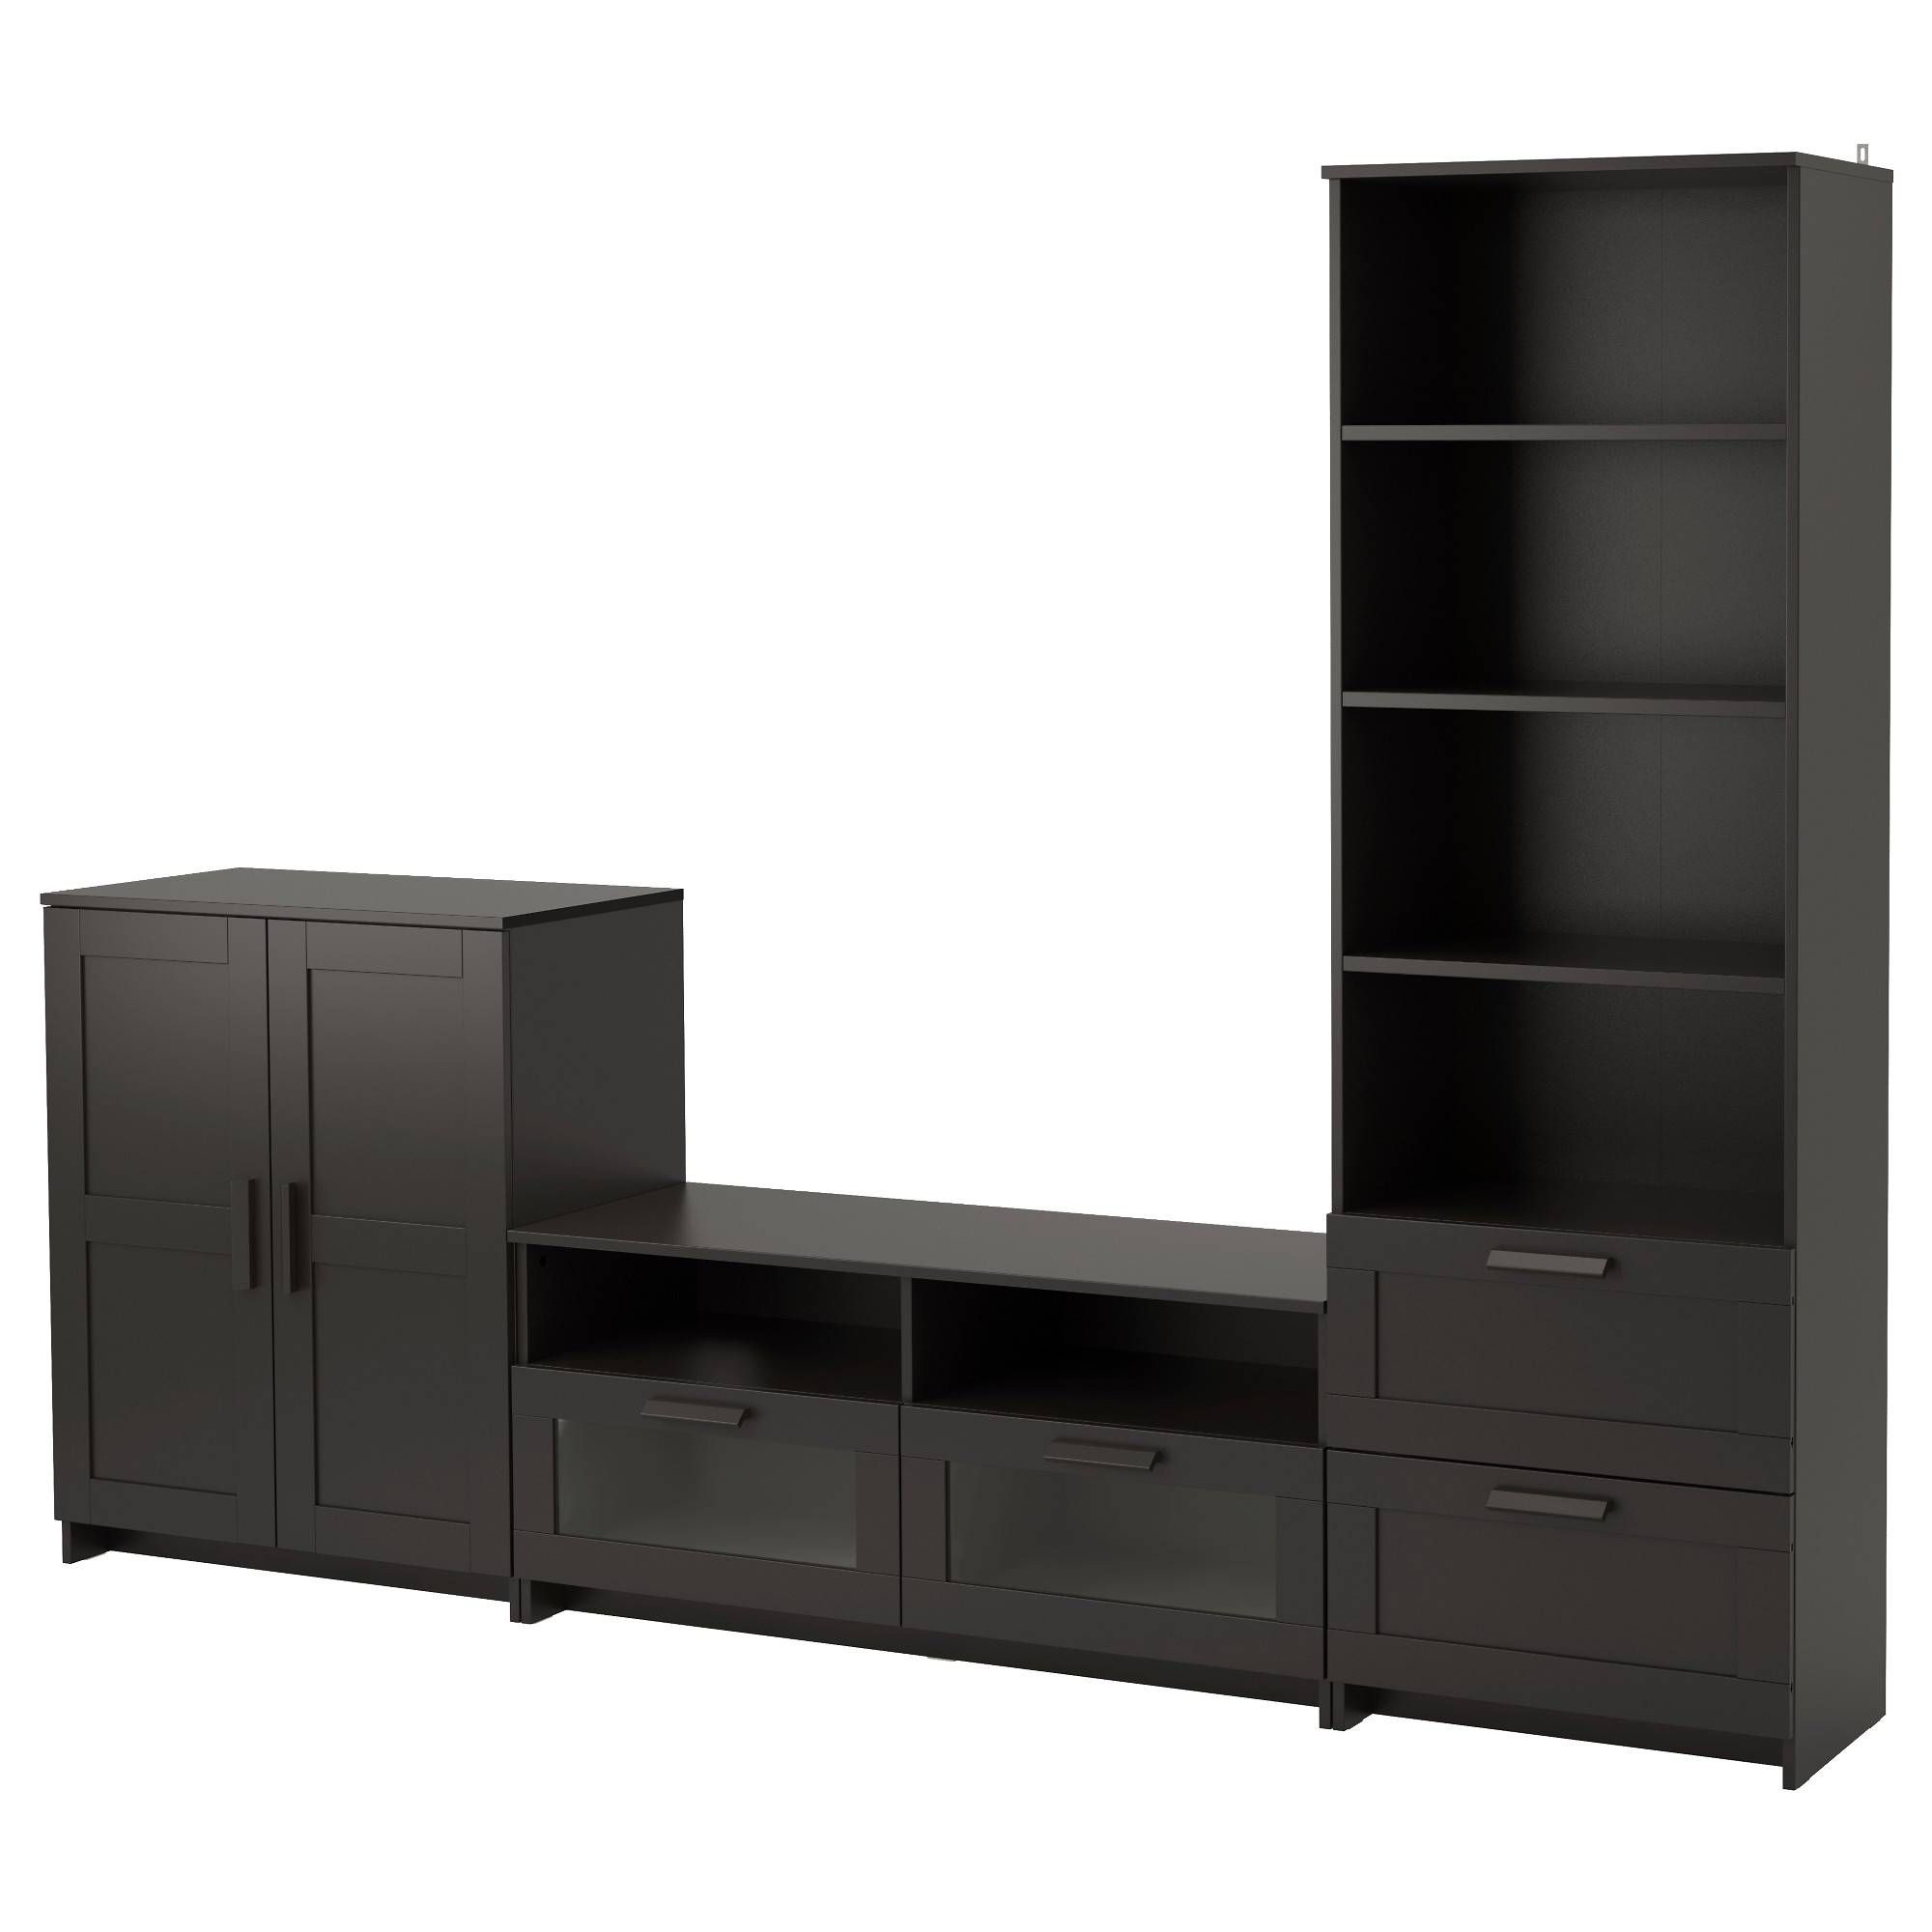 Brimnes Tv Storage Combination Black 260x41x190 Cm – Ikea In Black Tv Cabinets With Drawers (View 5 of 15)